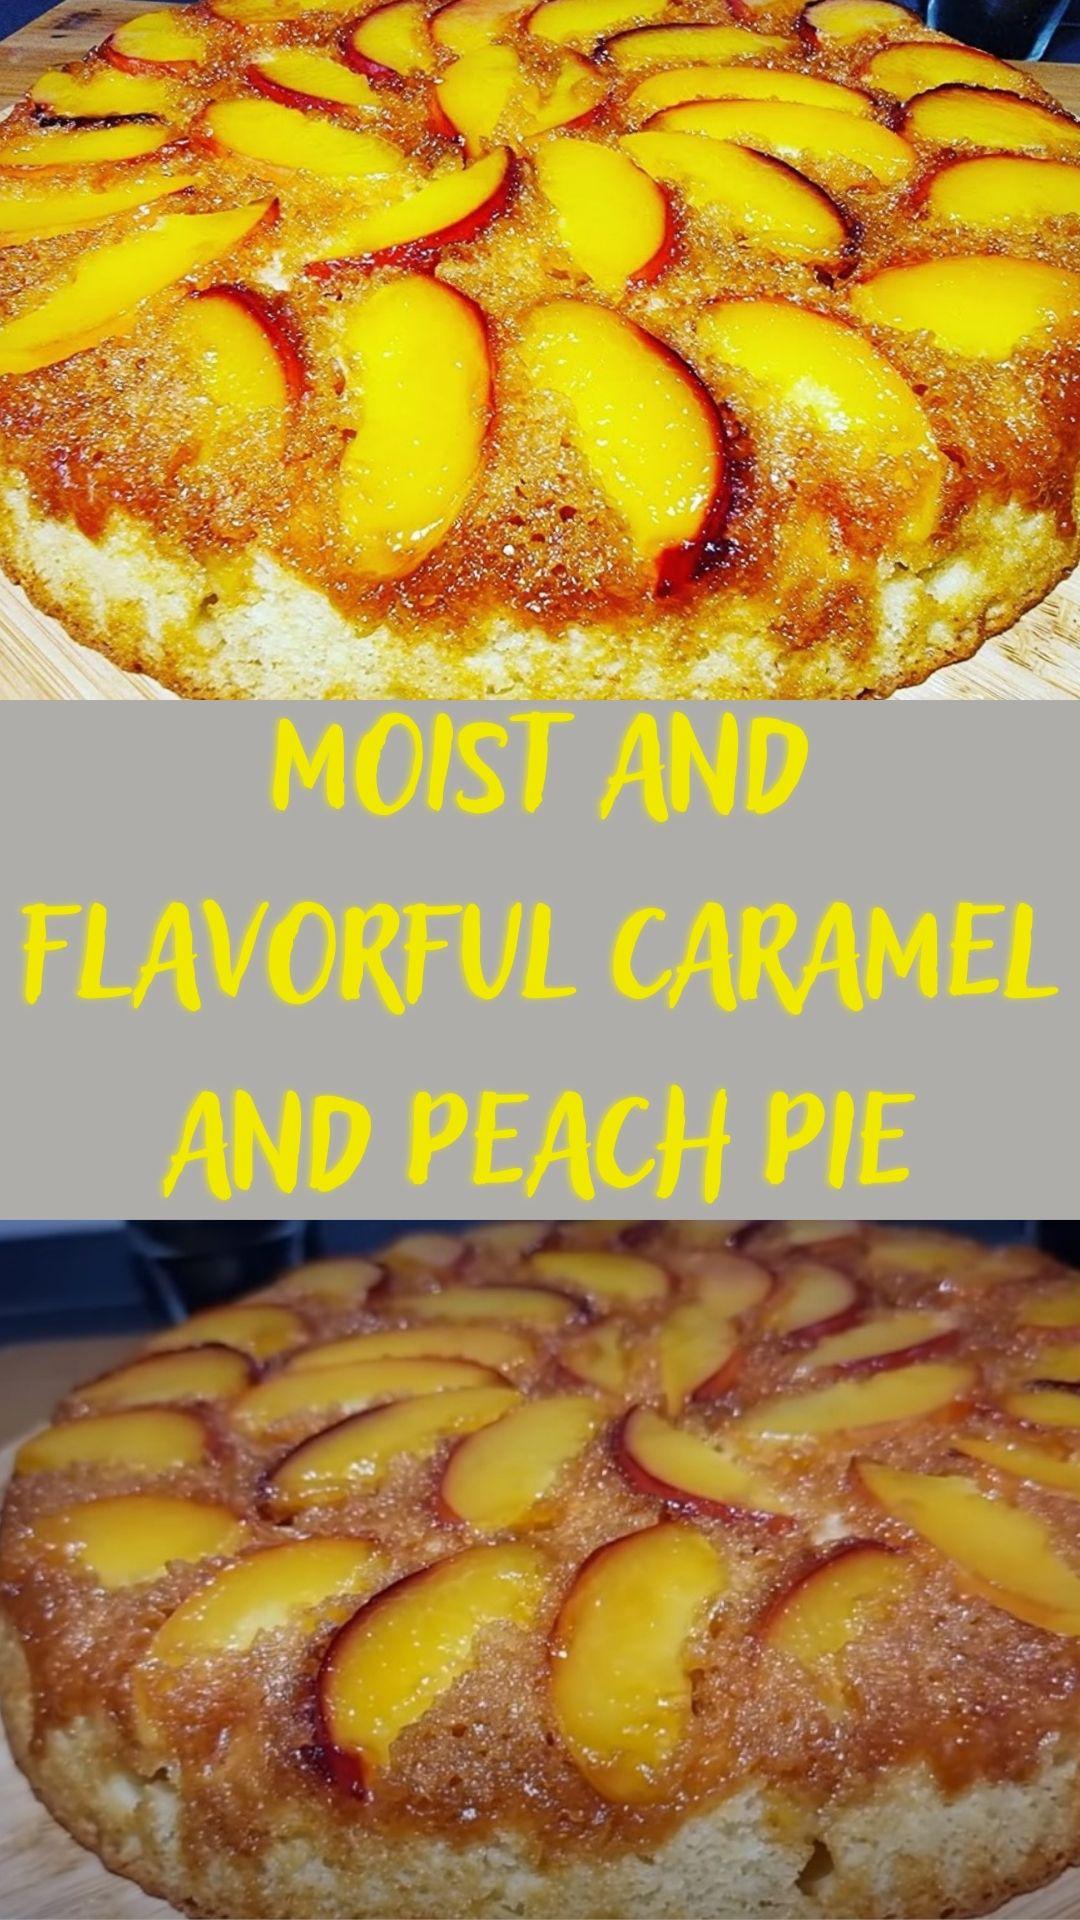 Moist and flavorful caramel and peach pie